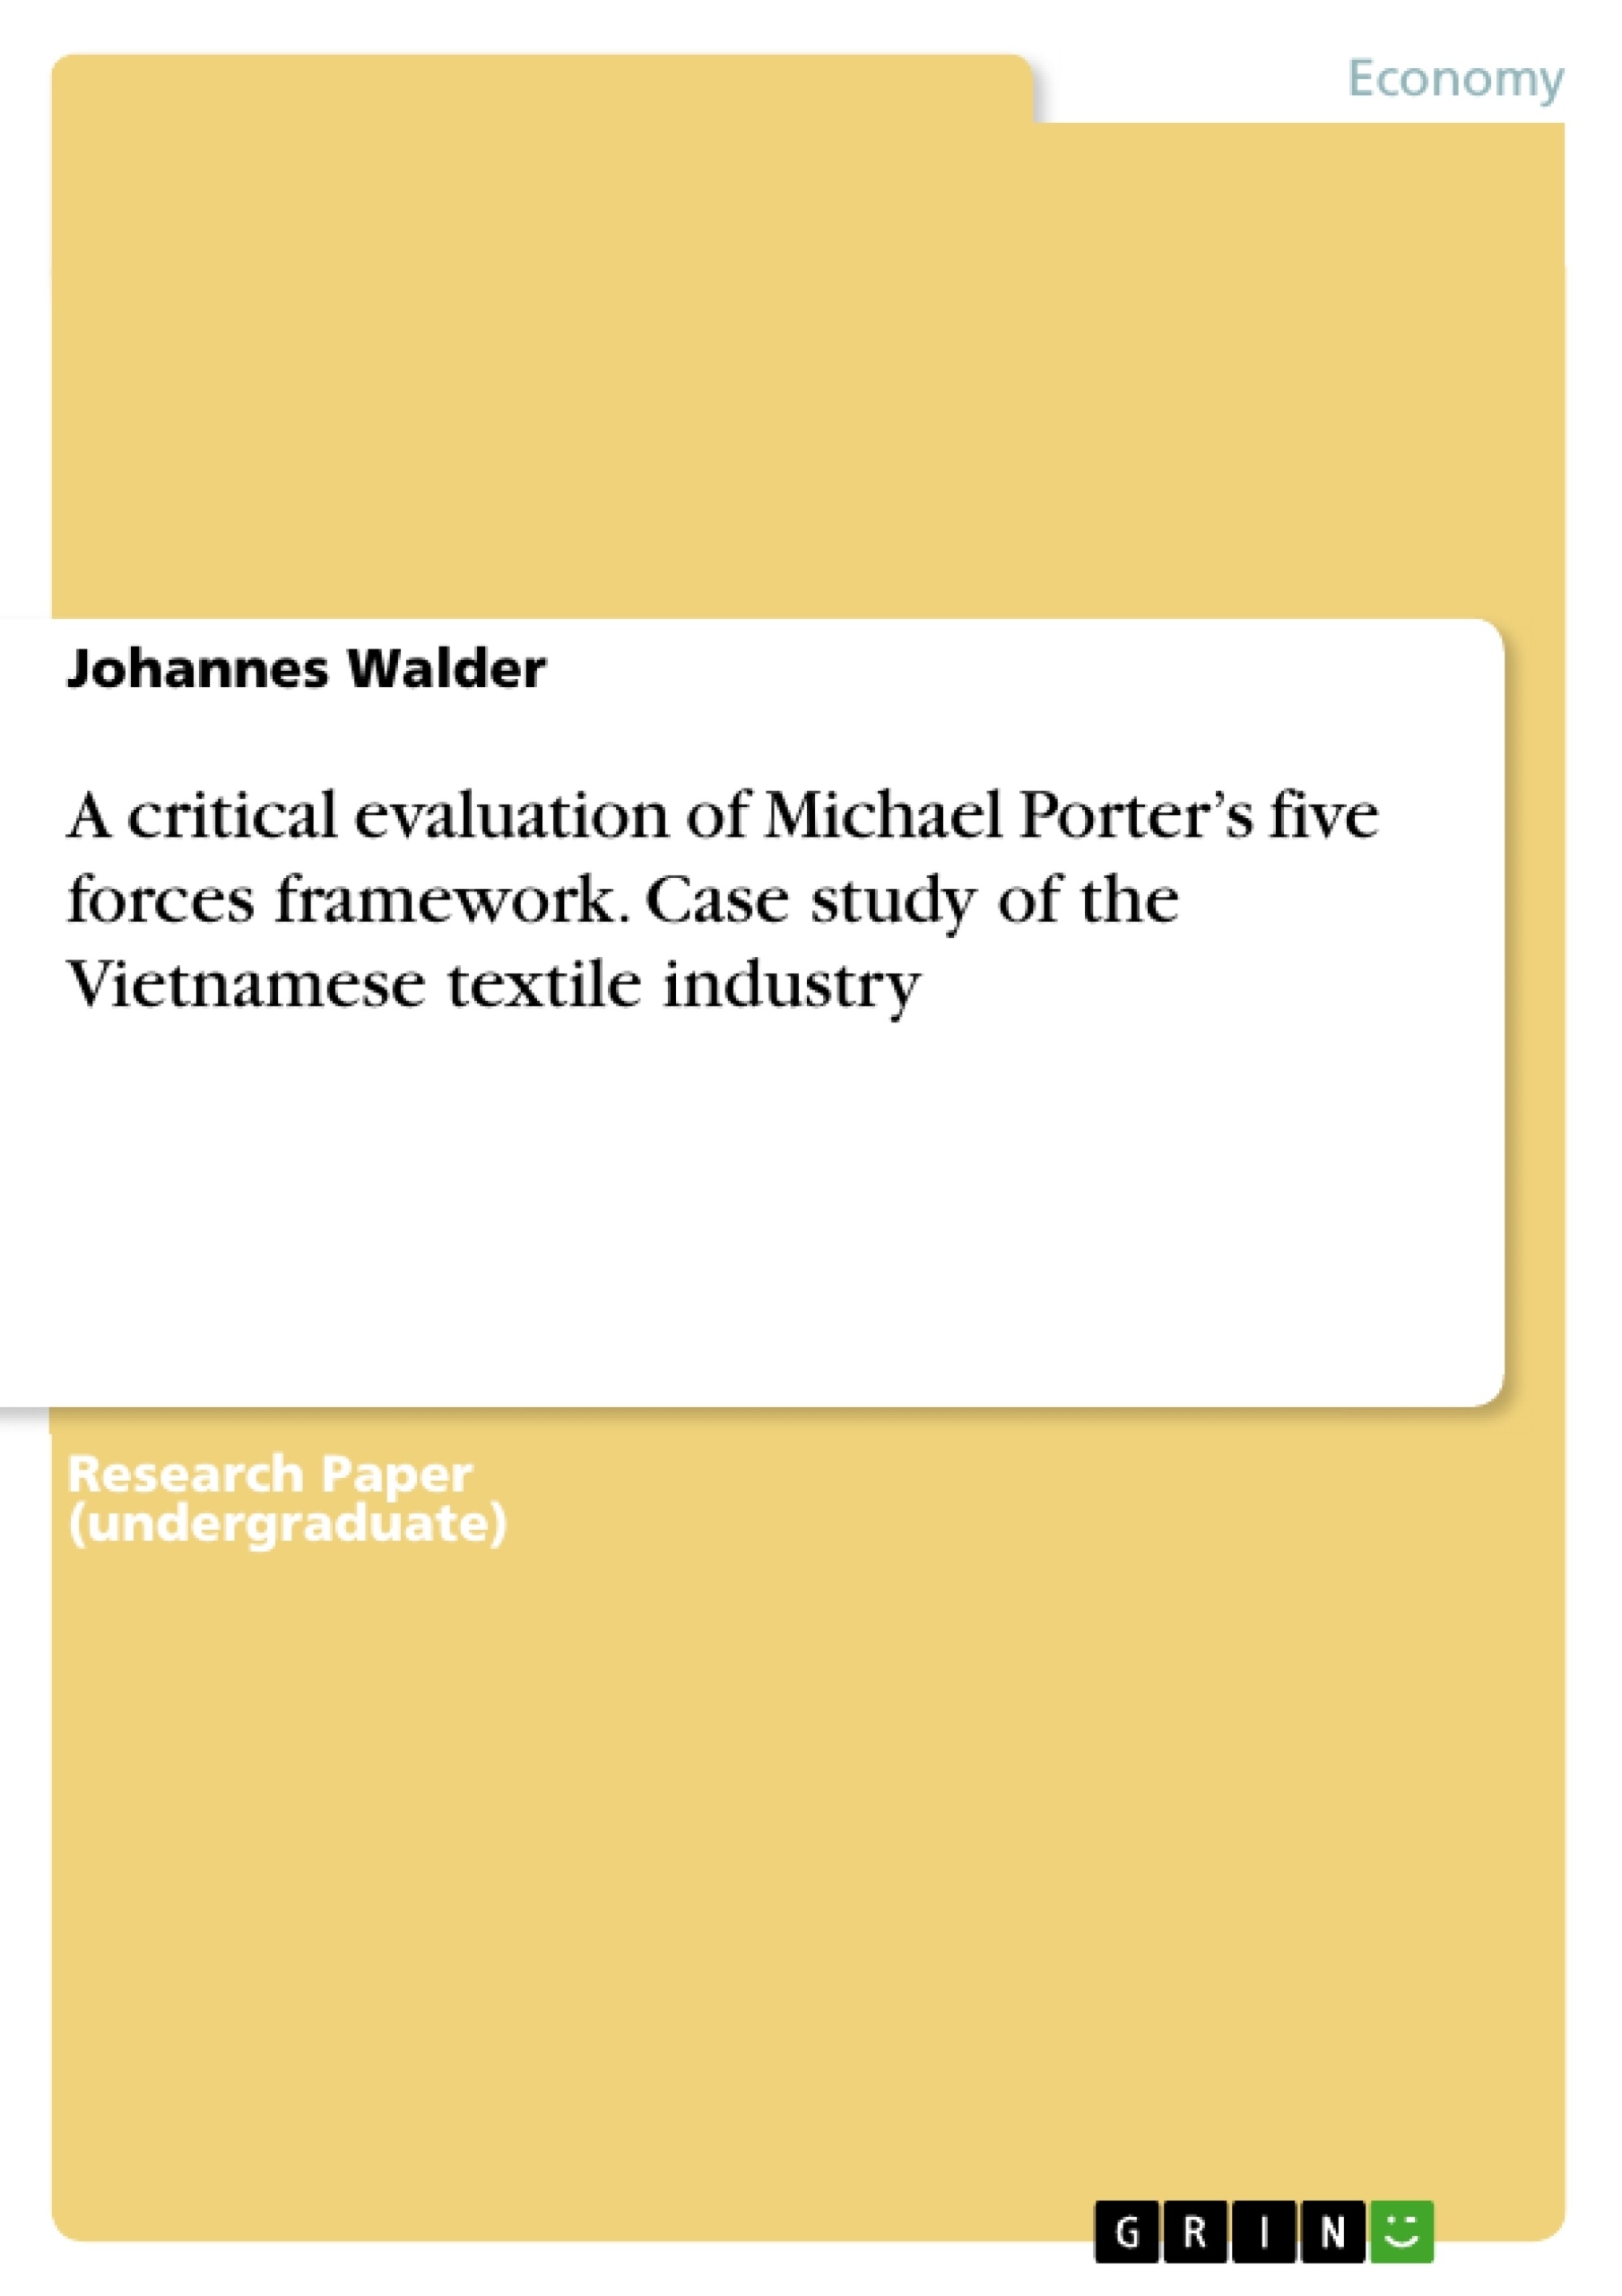 Title: A critical evaluation of Michael Porter’s five forces framework. Case study of the Vietnamese textile industry